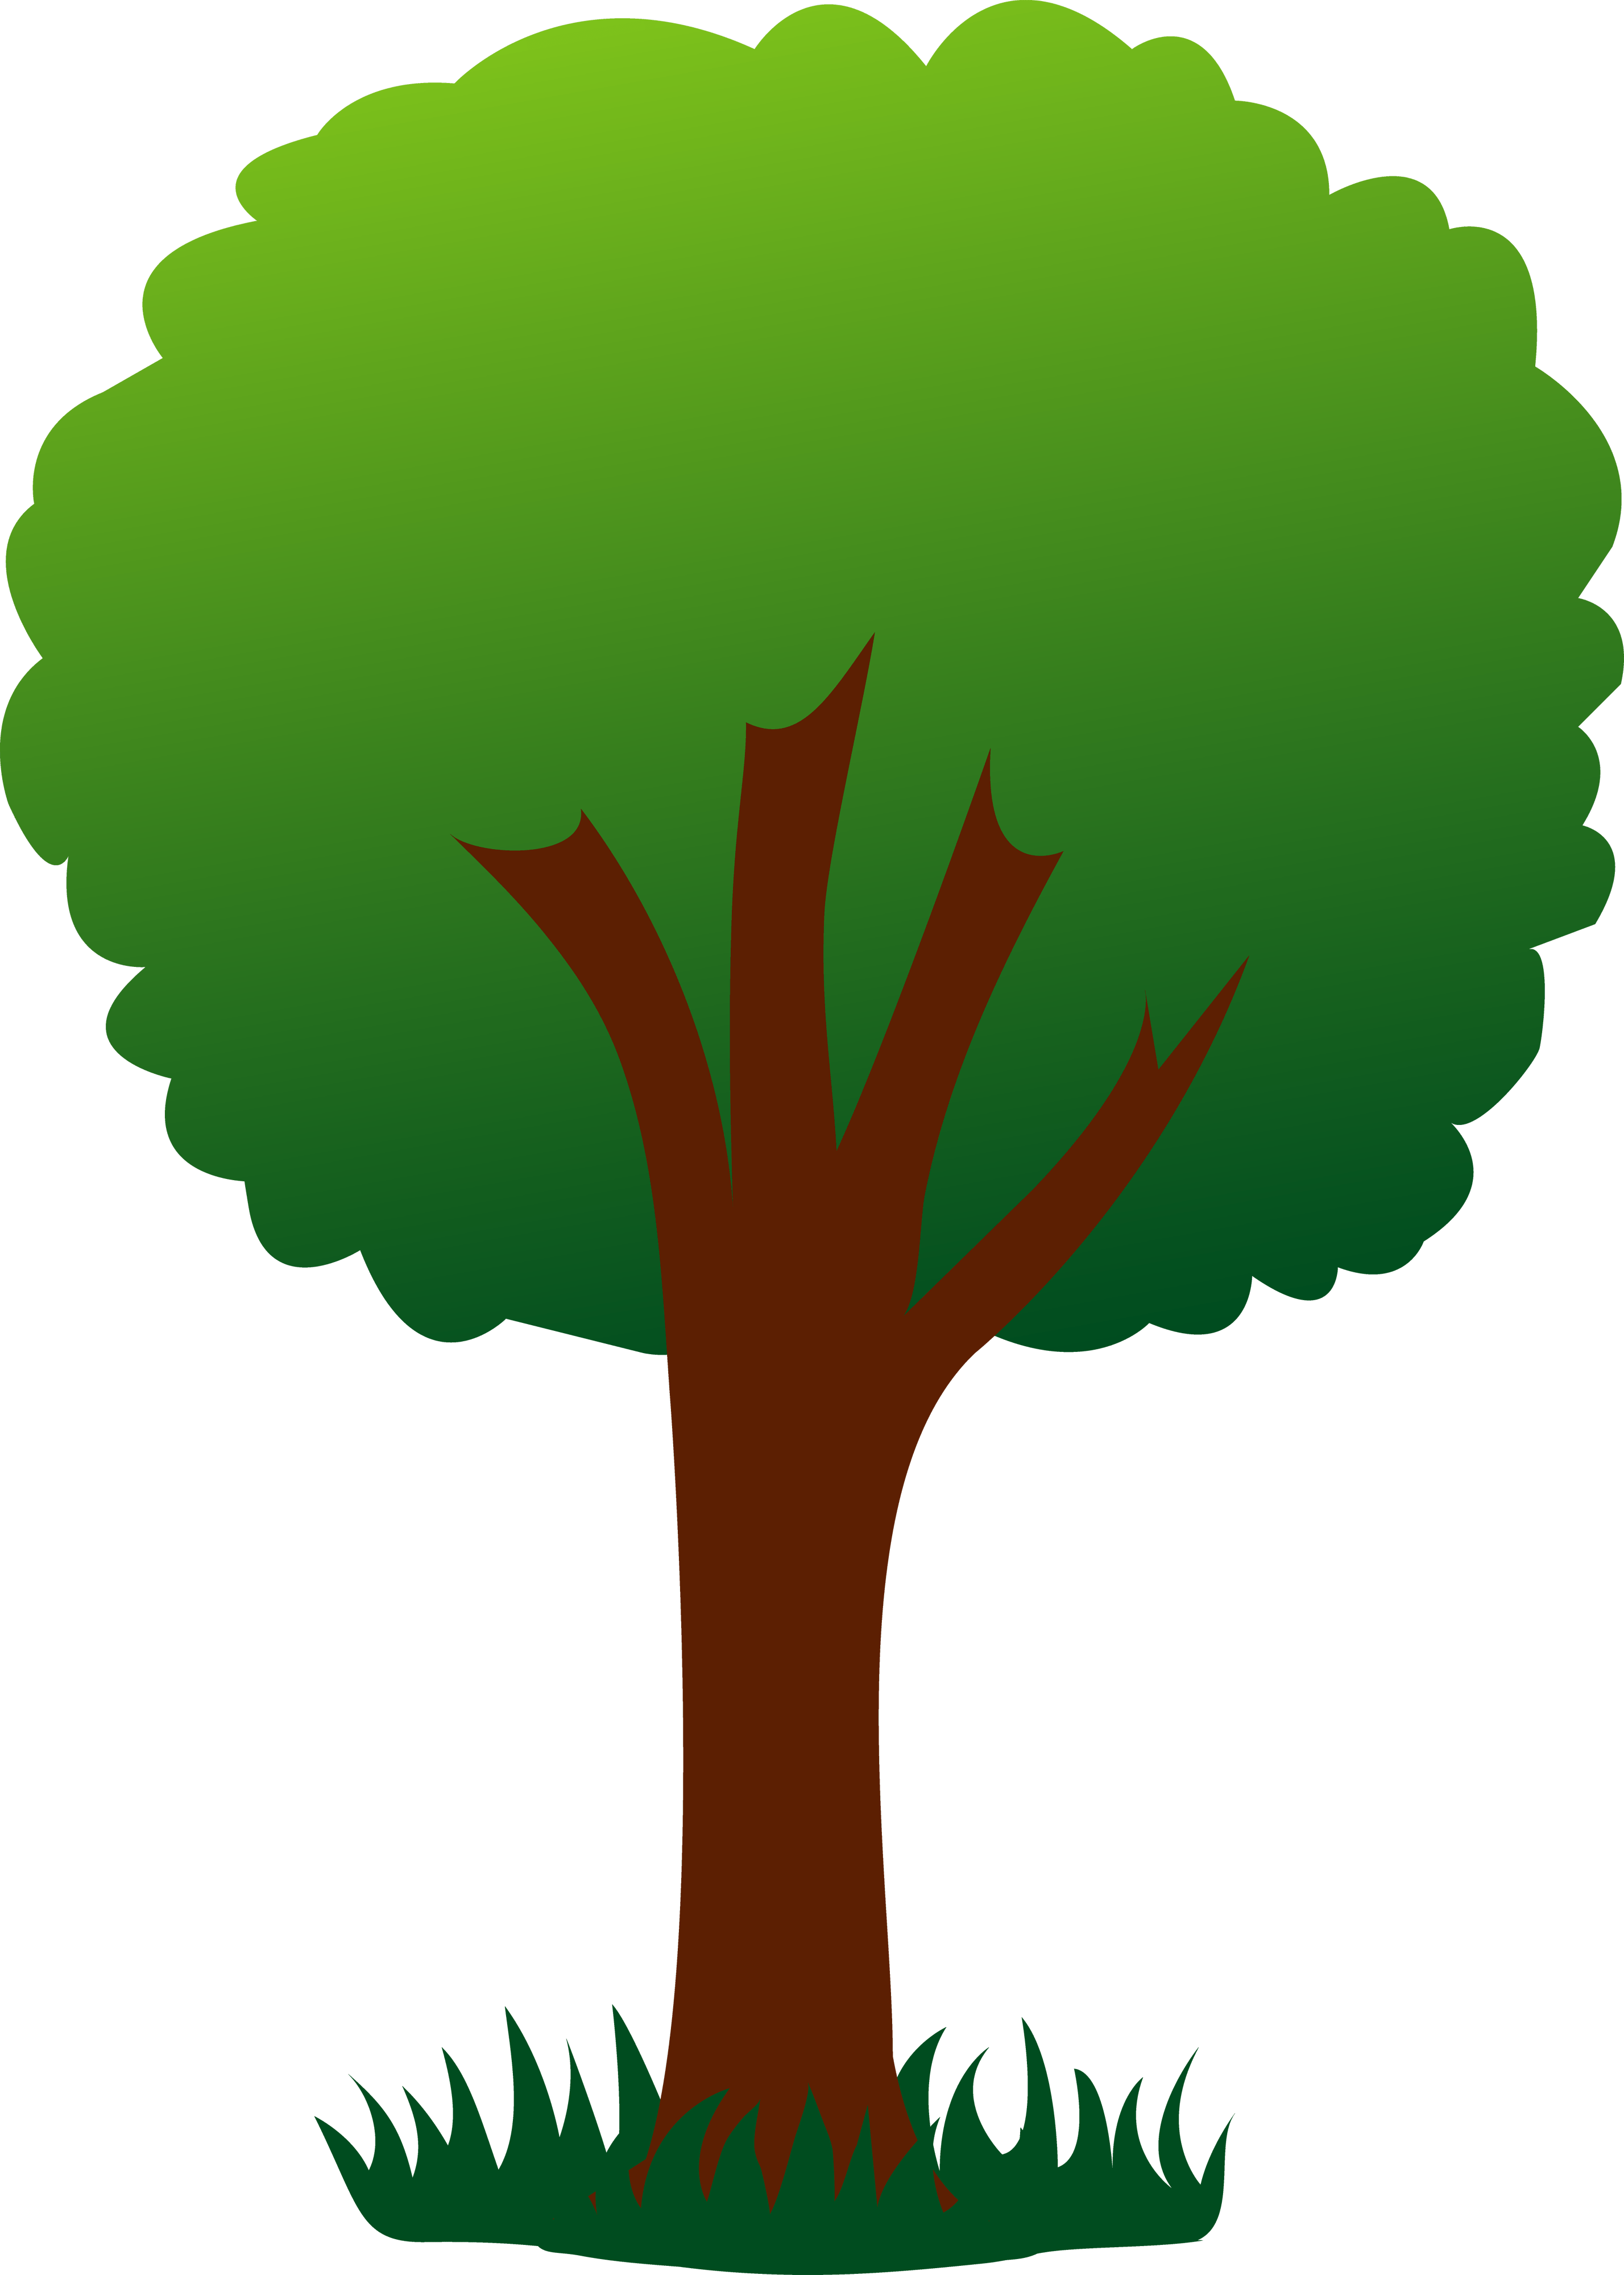 Free Tree Vector Cliparts, Download Free Tree Vector Cliparts png